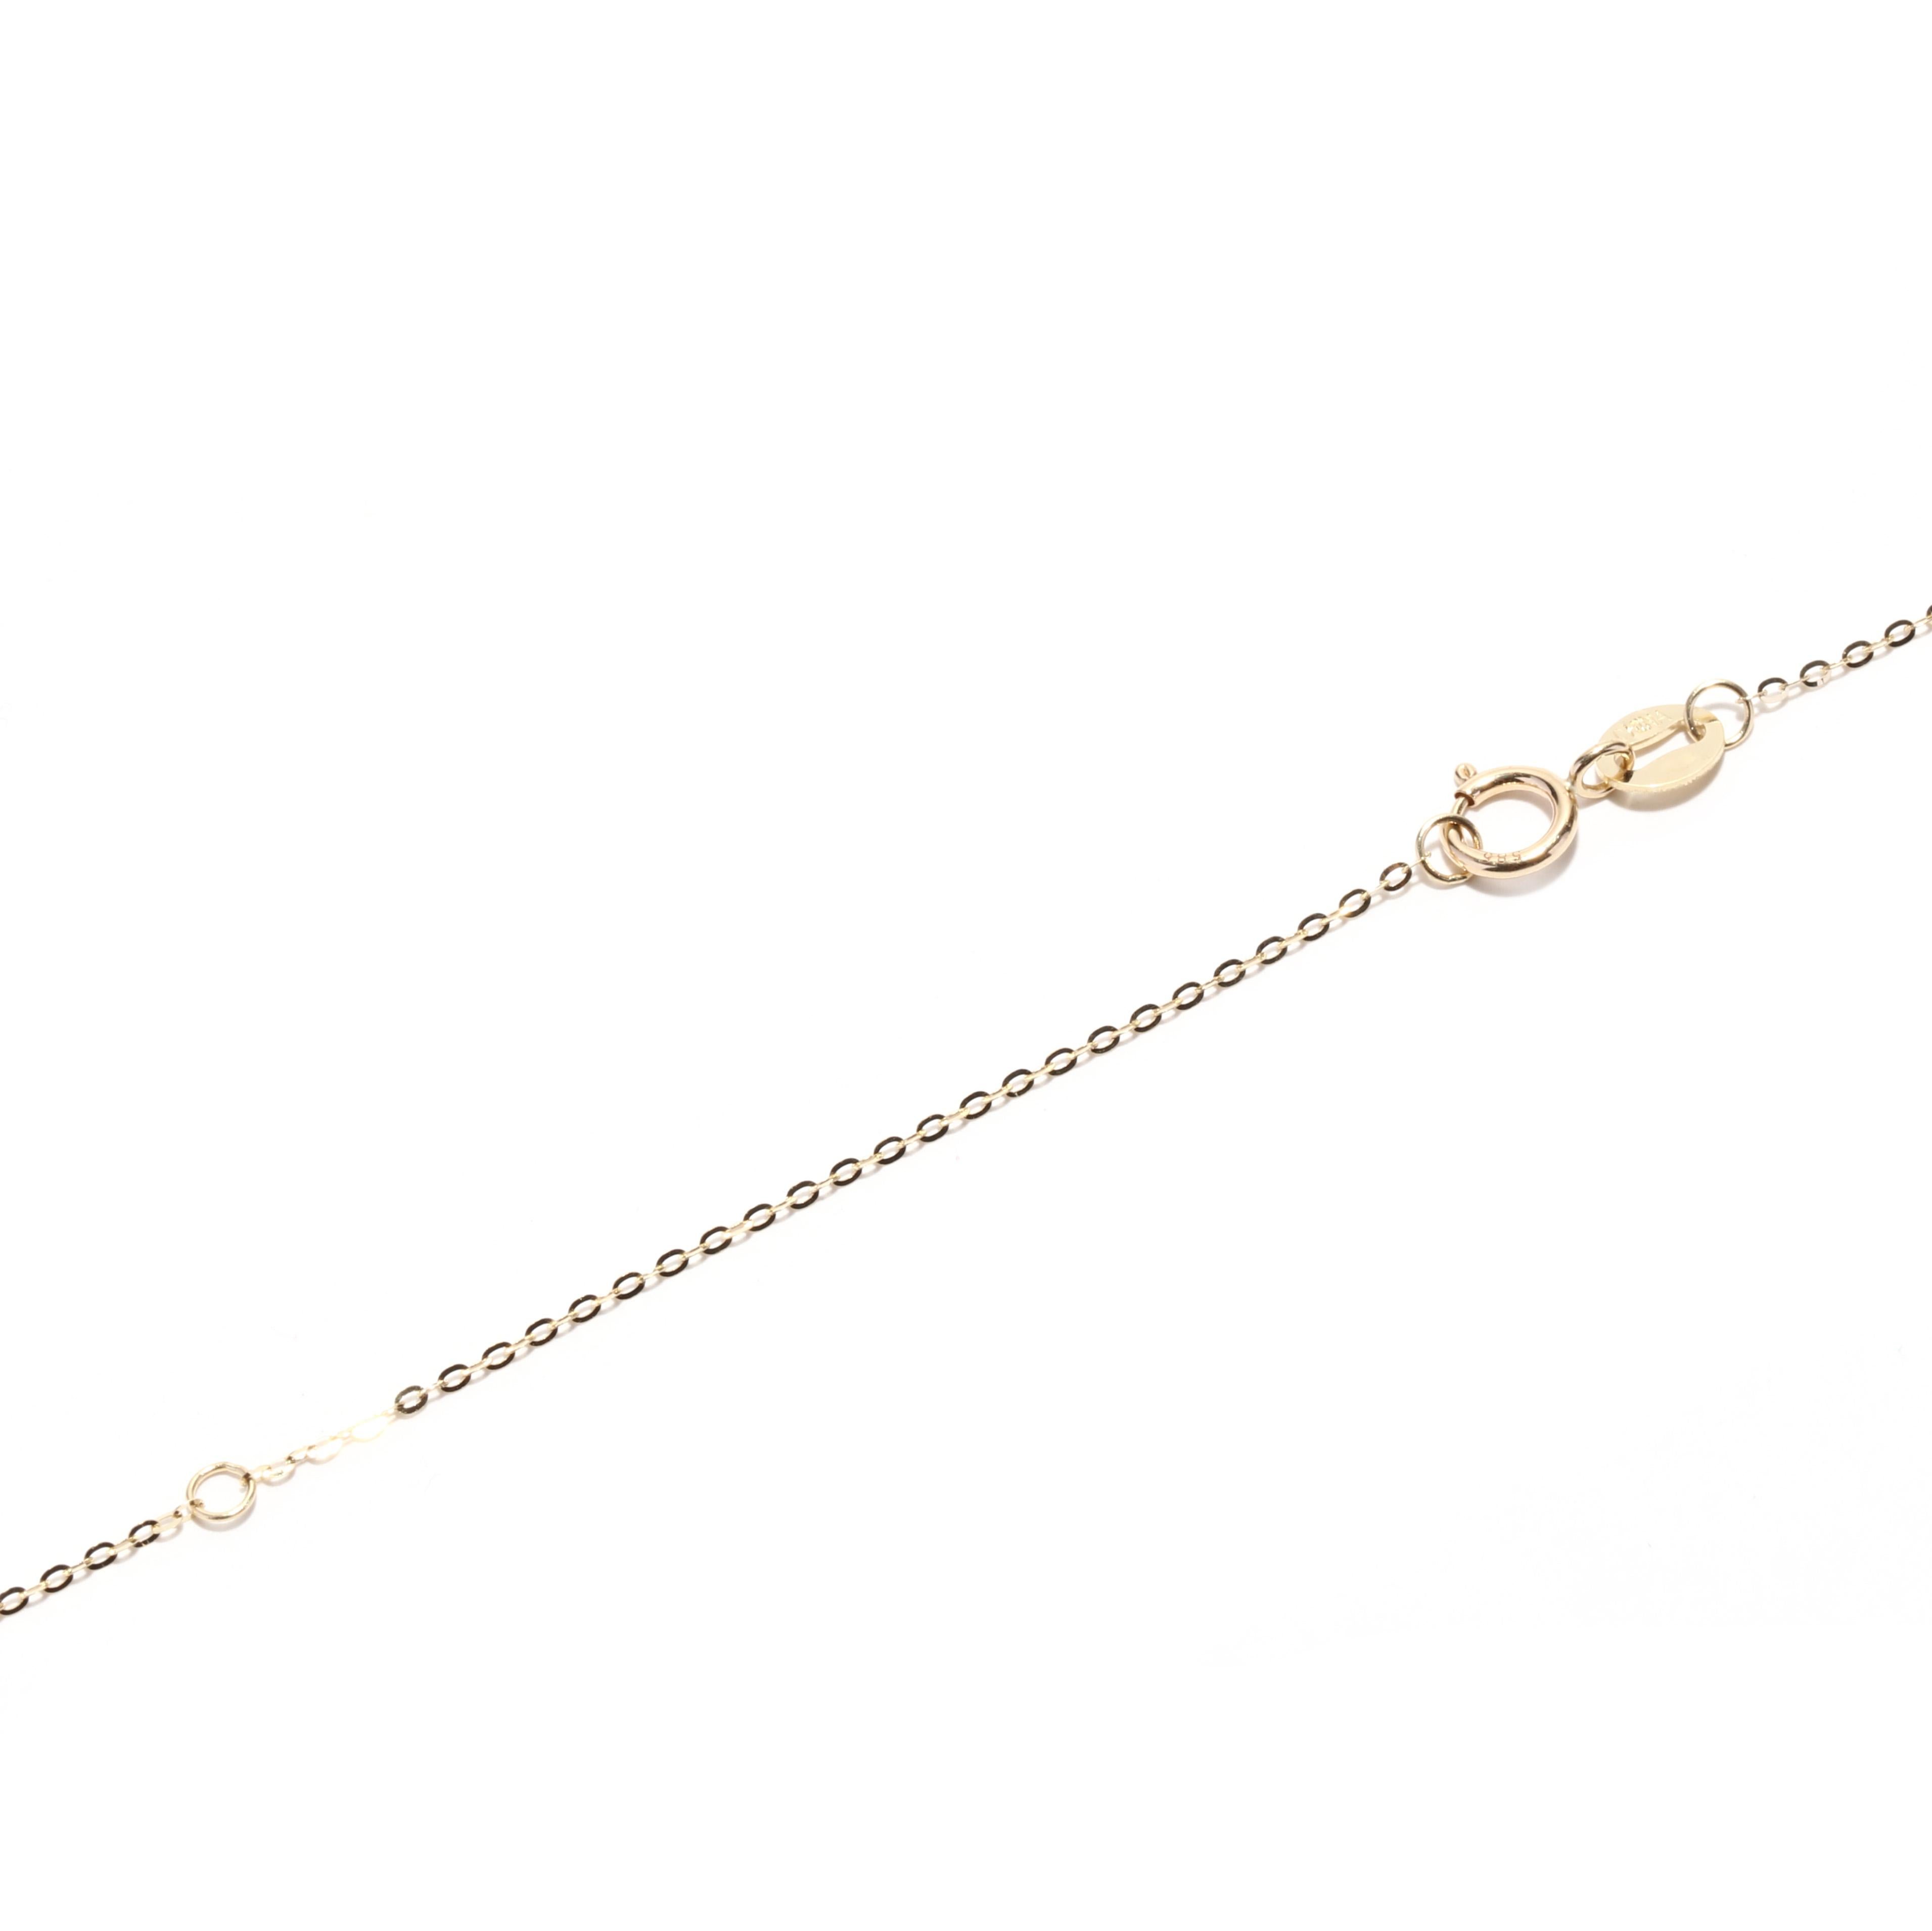 Gold R Initial Necklace, 14KT Yellow Gold, Length 16 Inches, Initial Pendant 2